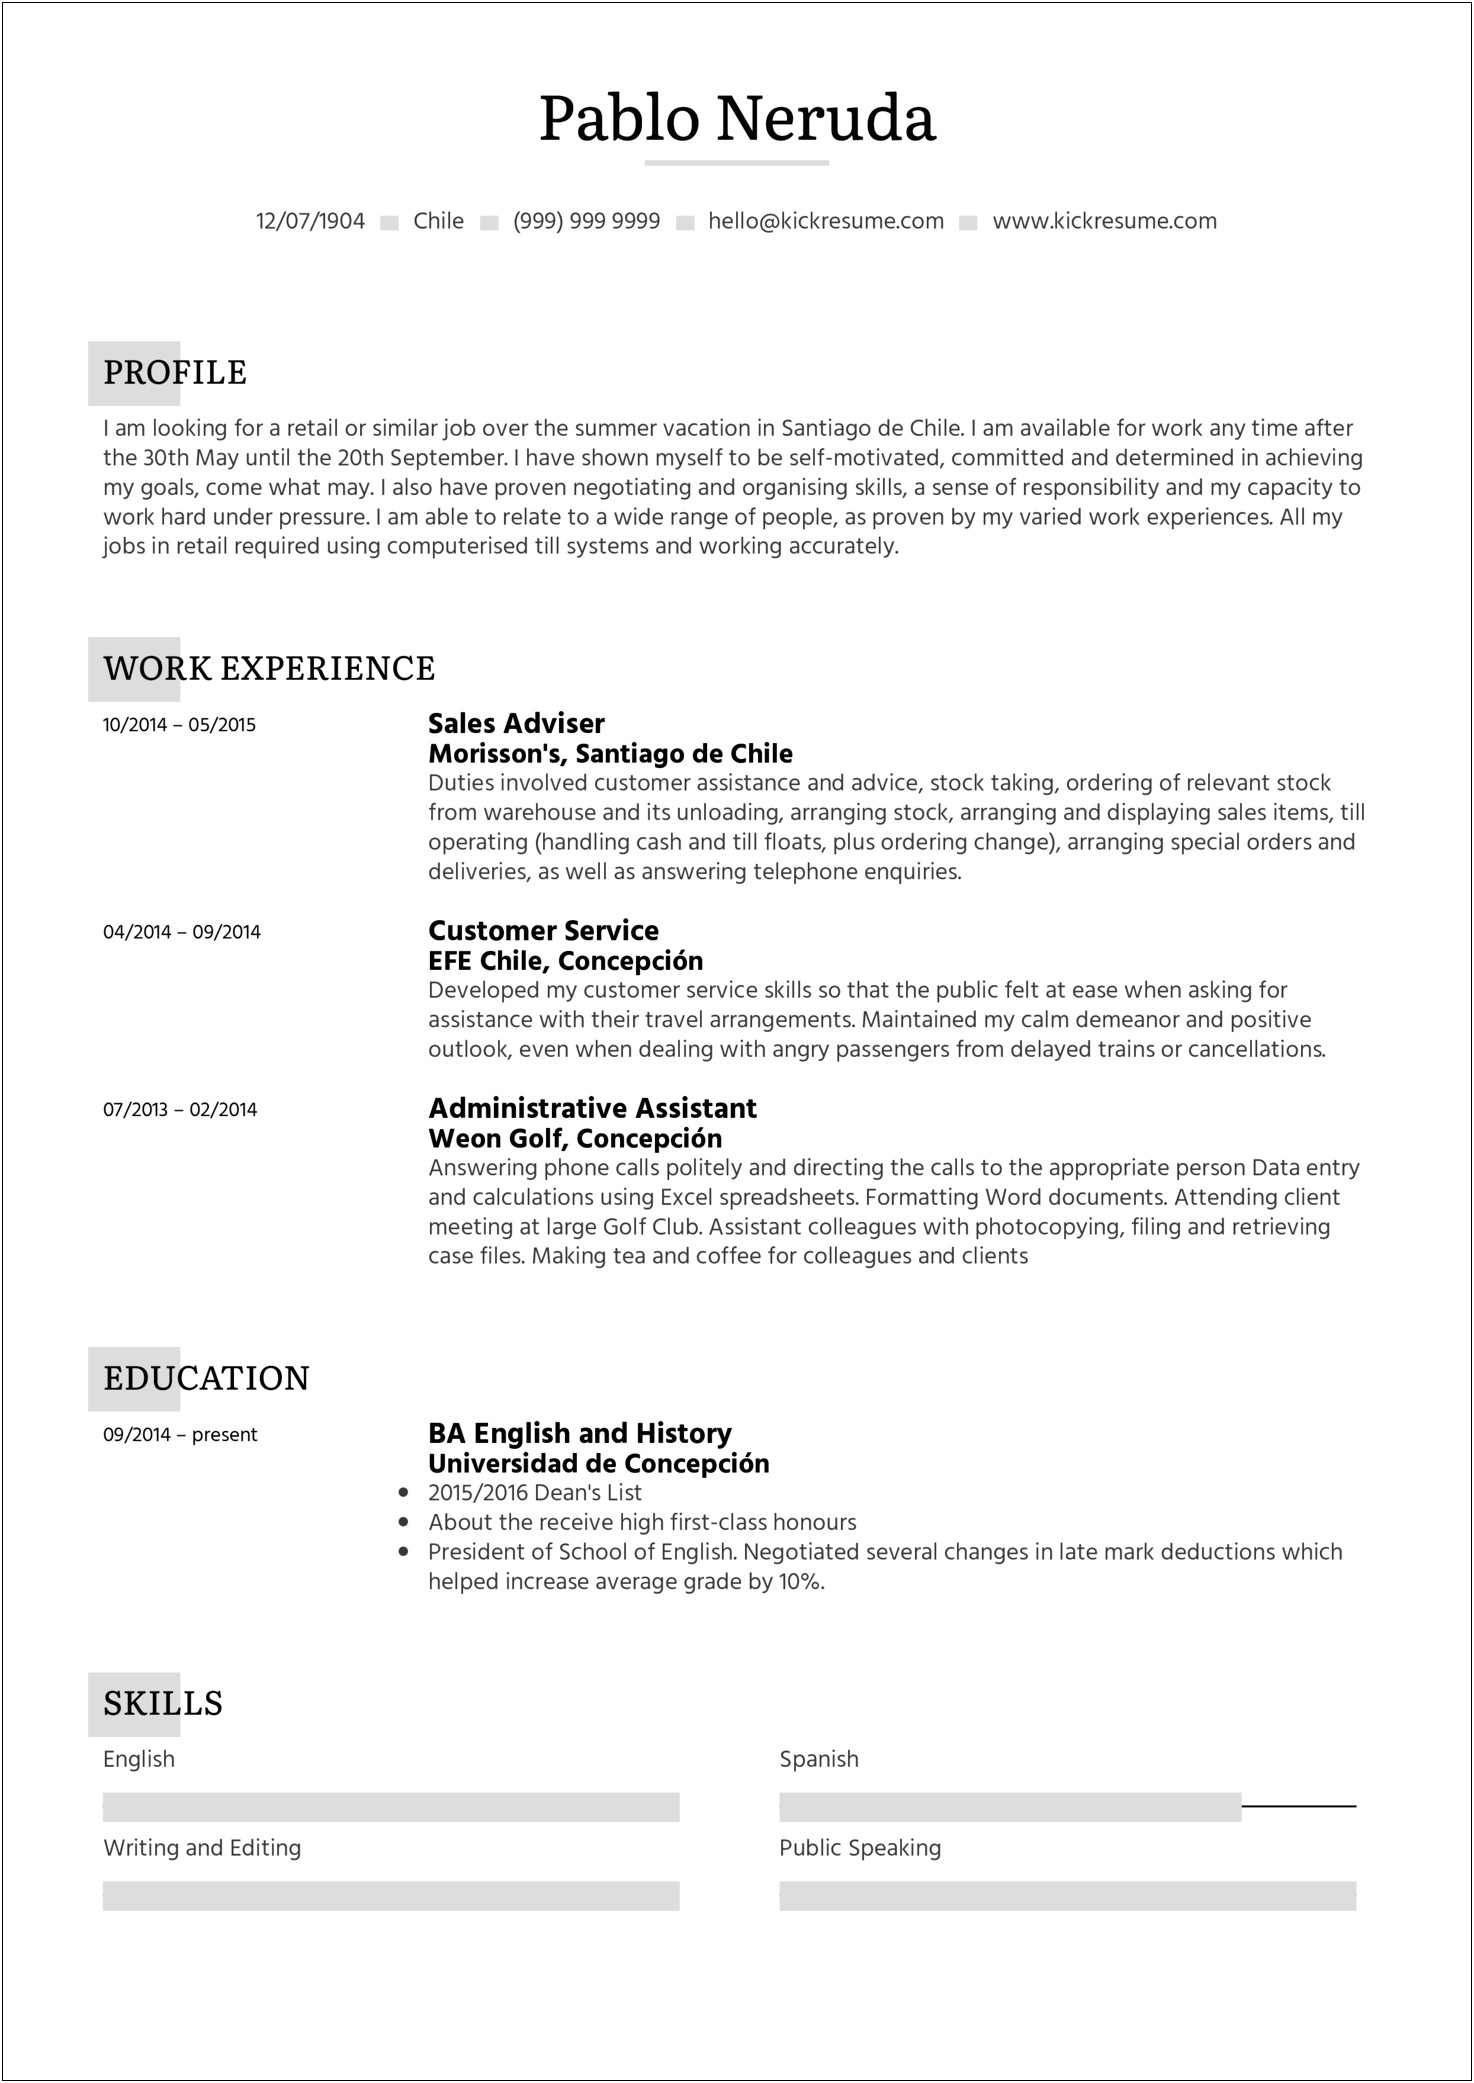 Career Focus Examples For Student Resume